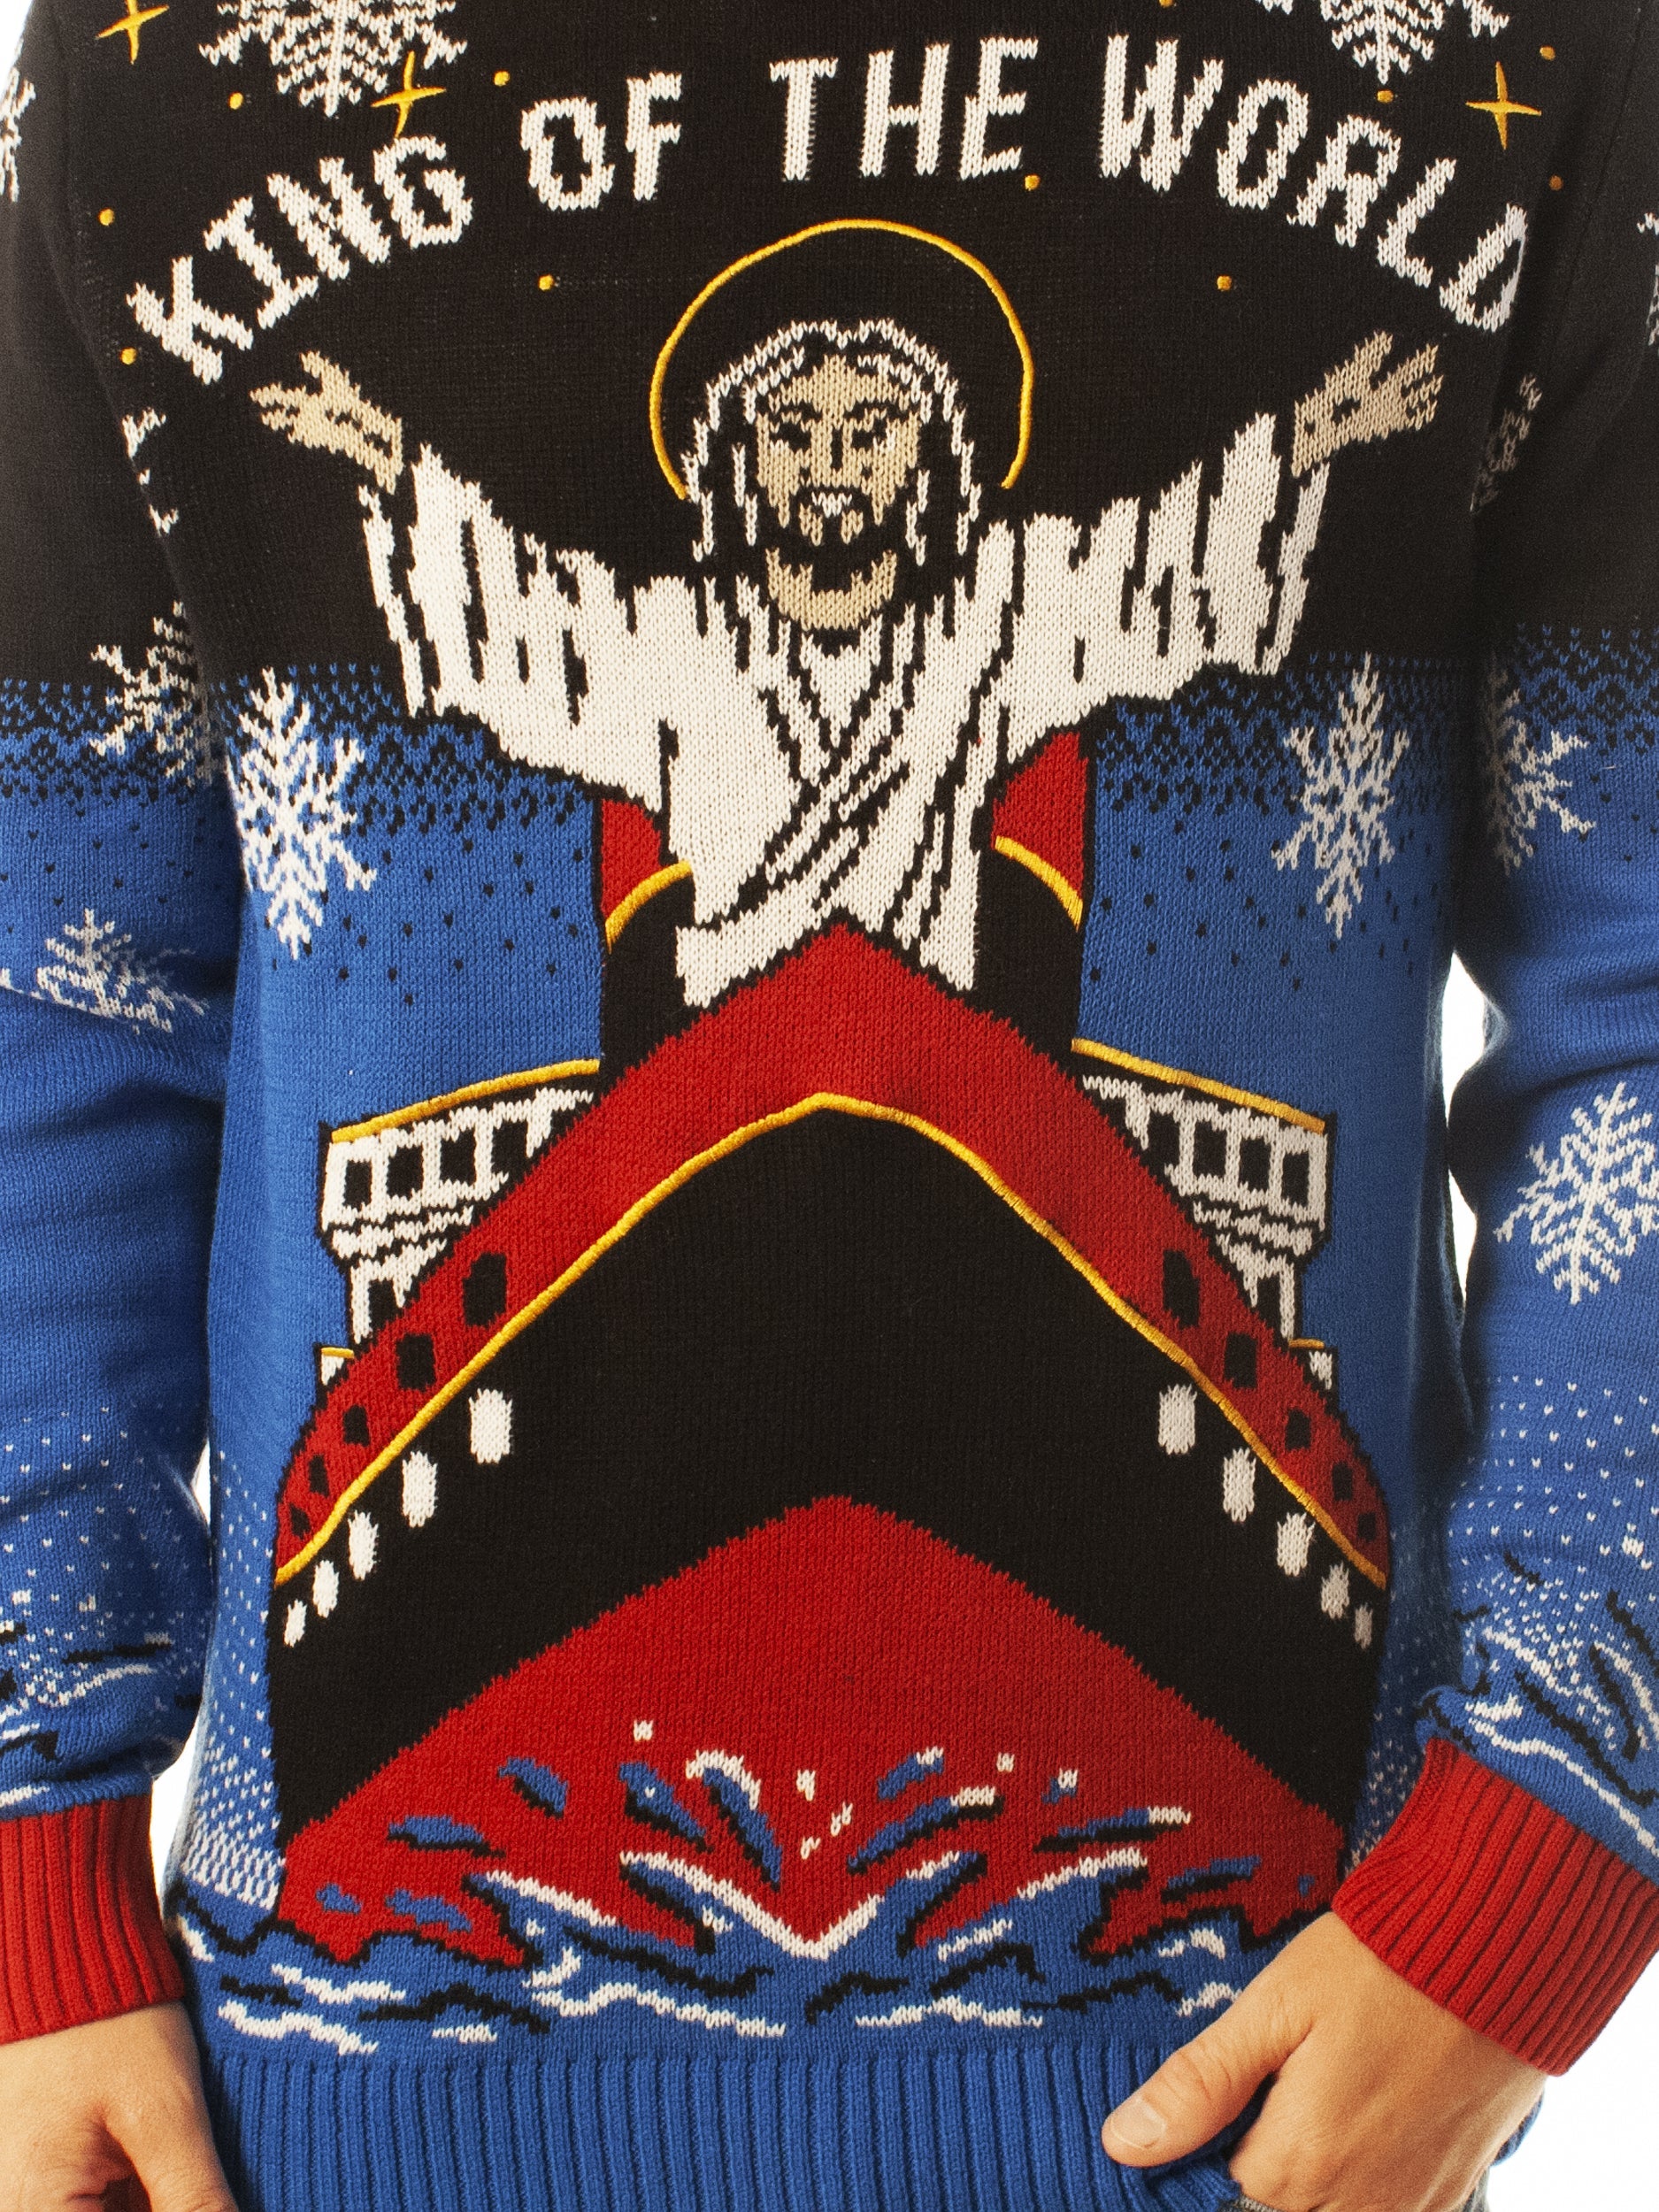 Jesus King Of The World Ugly Christmas Sweater - Xmas Gifts For Him Or Her - Jesus Christ Sweater - Christian Shirts Gifts Idea